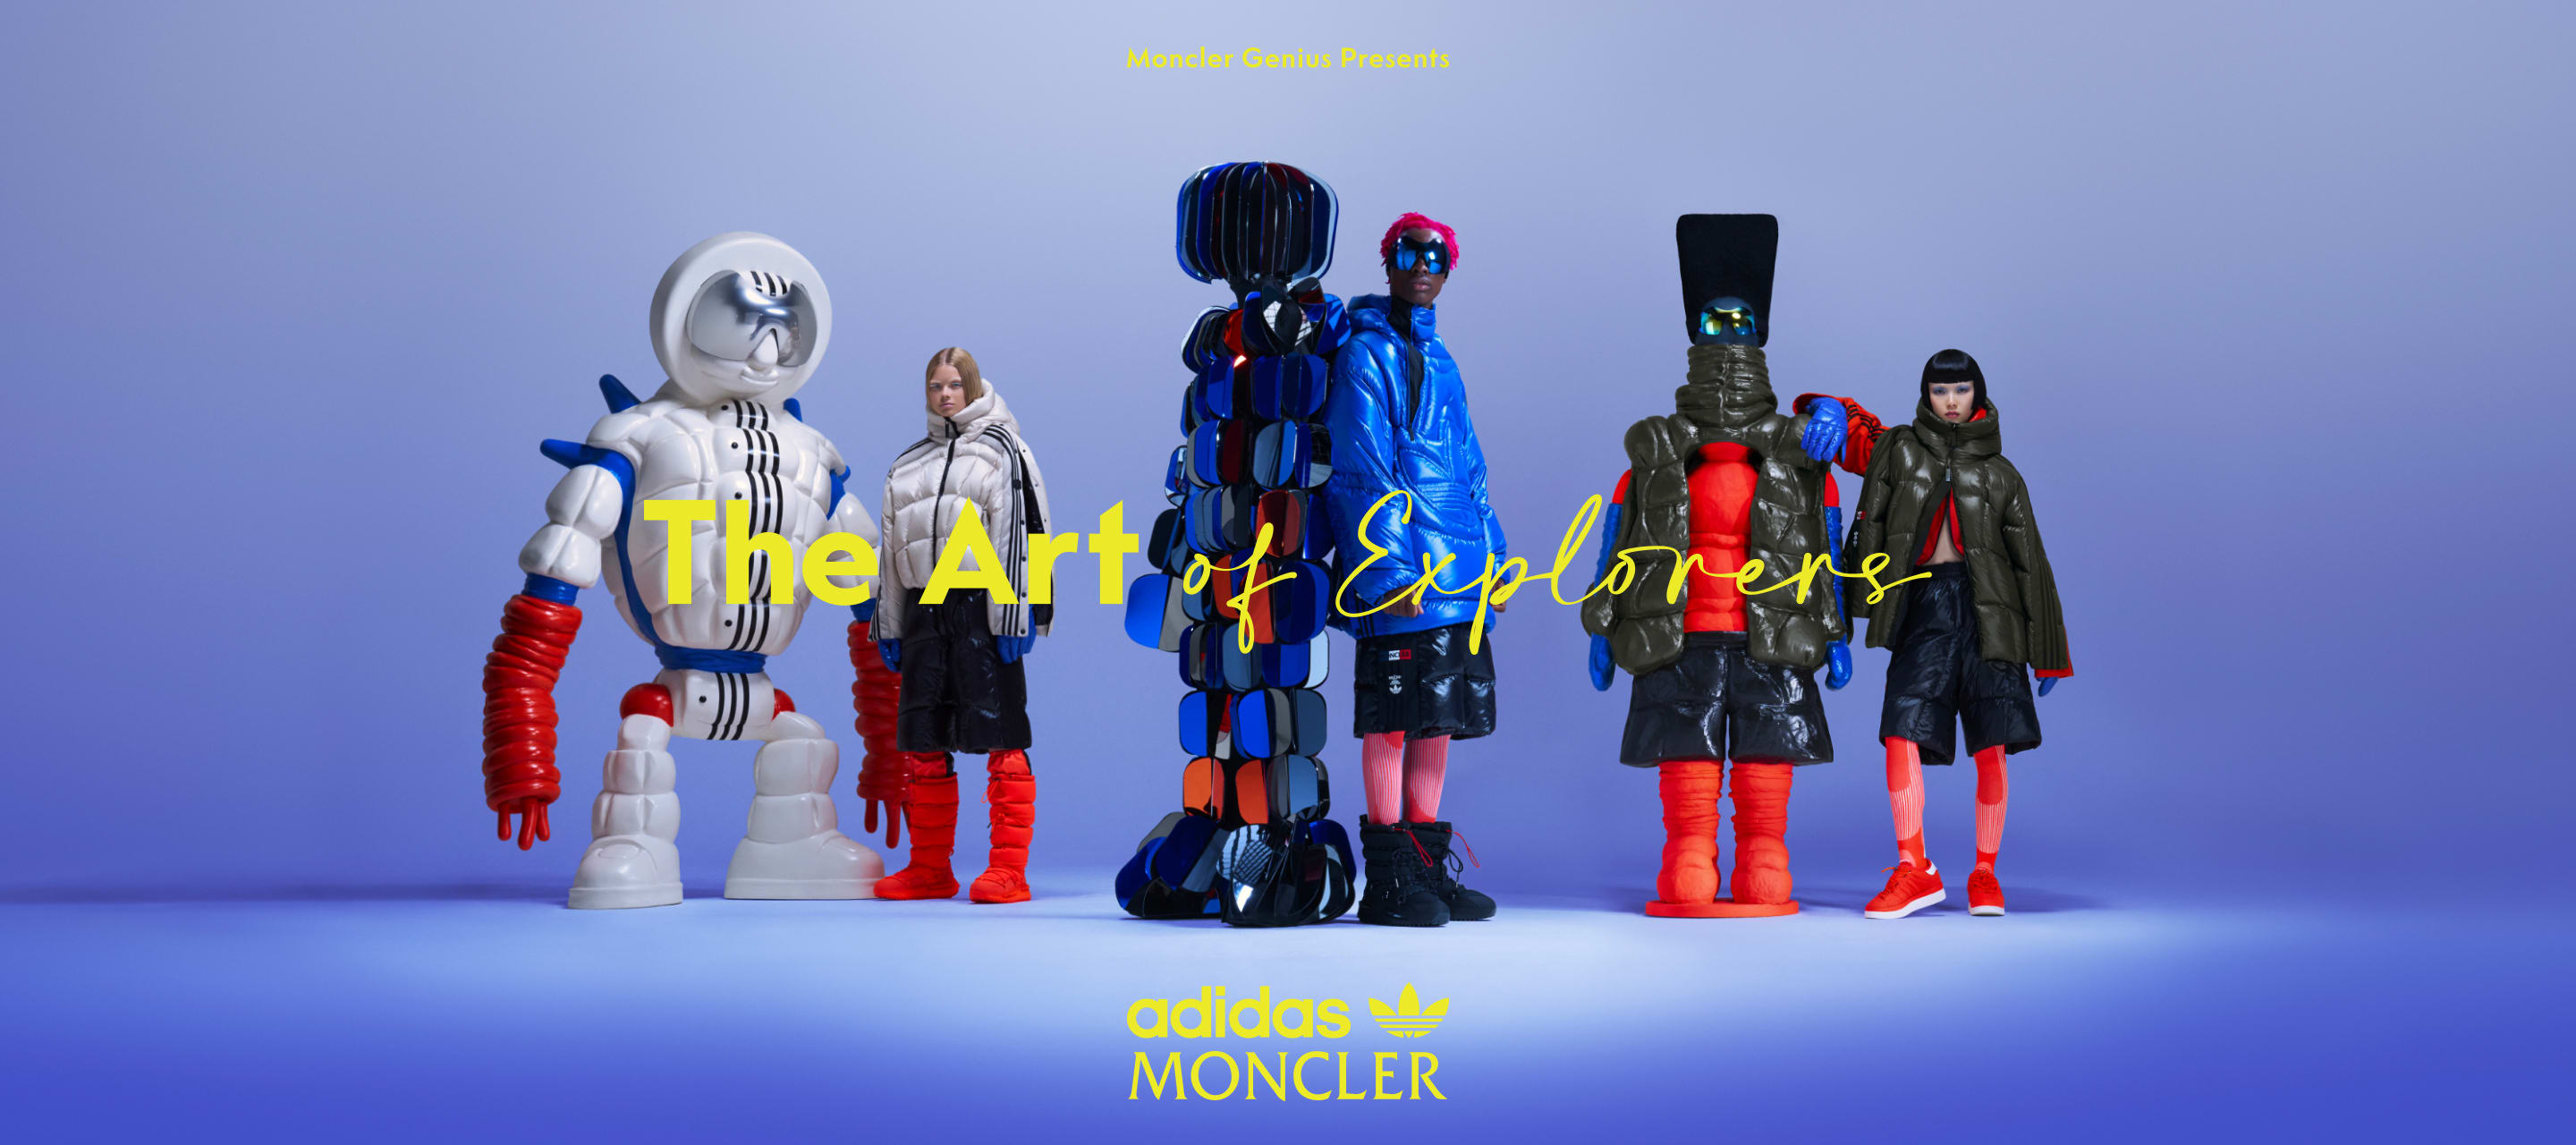 3 models wearing the Moncler x adidas Originals collection are shown standing next to 3 paired scupltures in a studio setting.